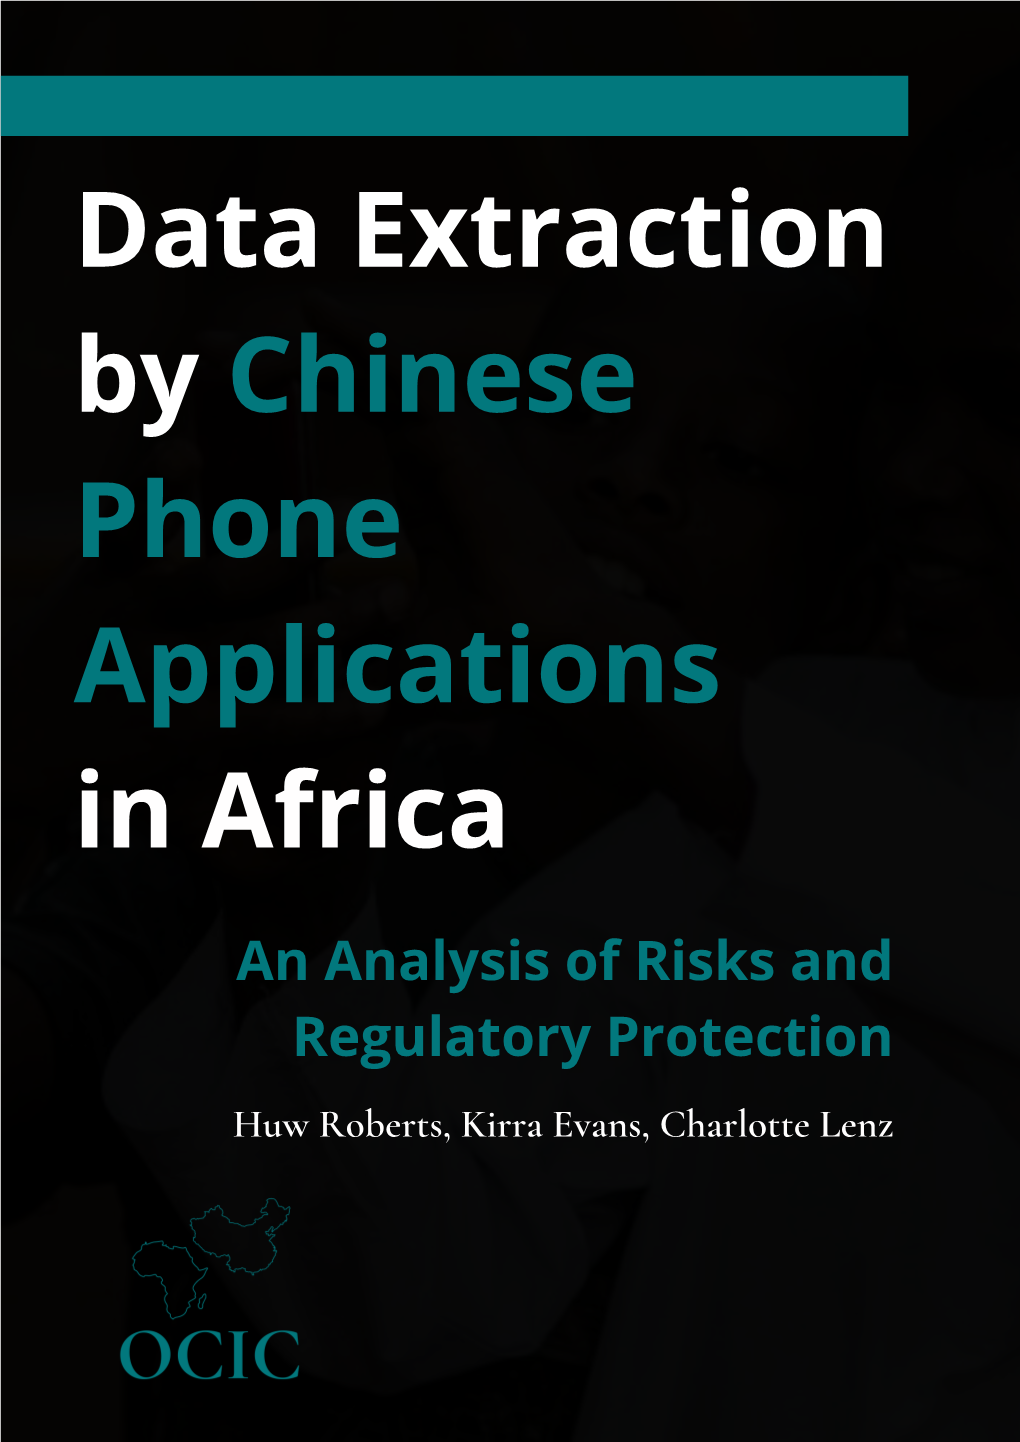 Data Extraction by Chinese Phone Applications in Africa